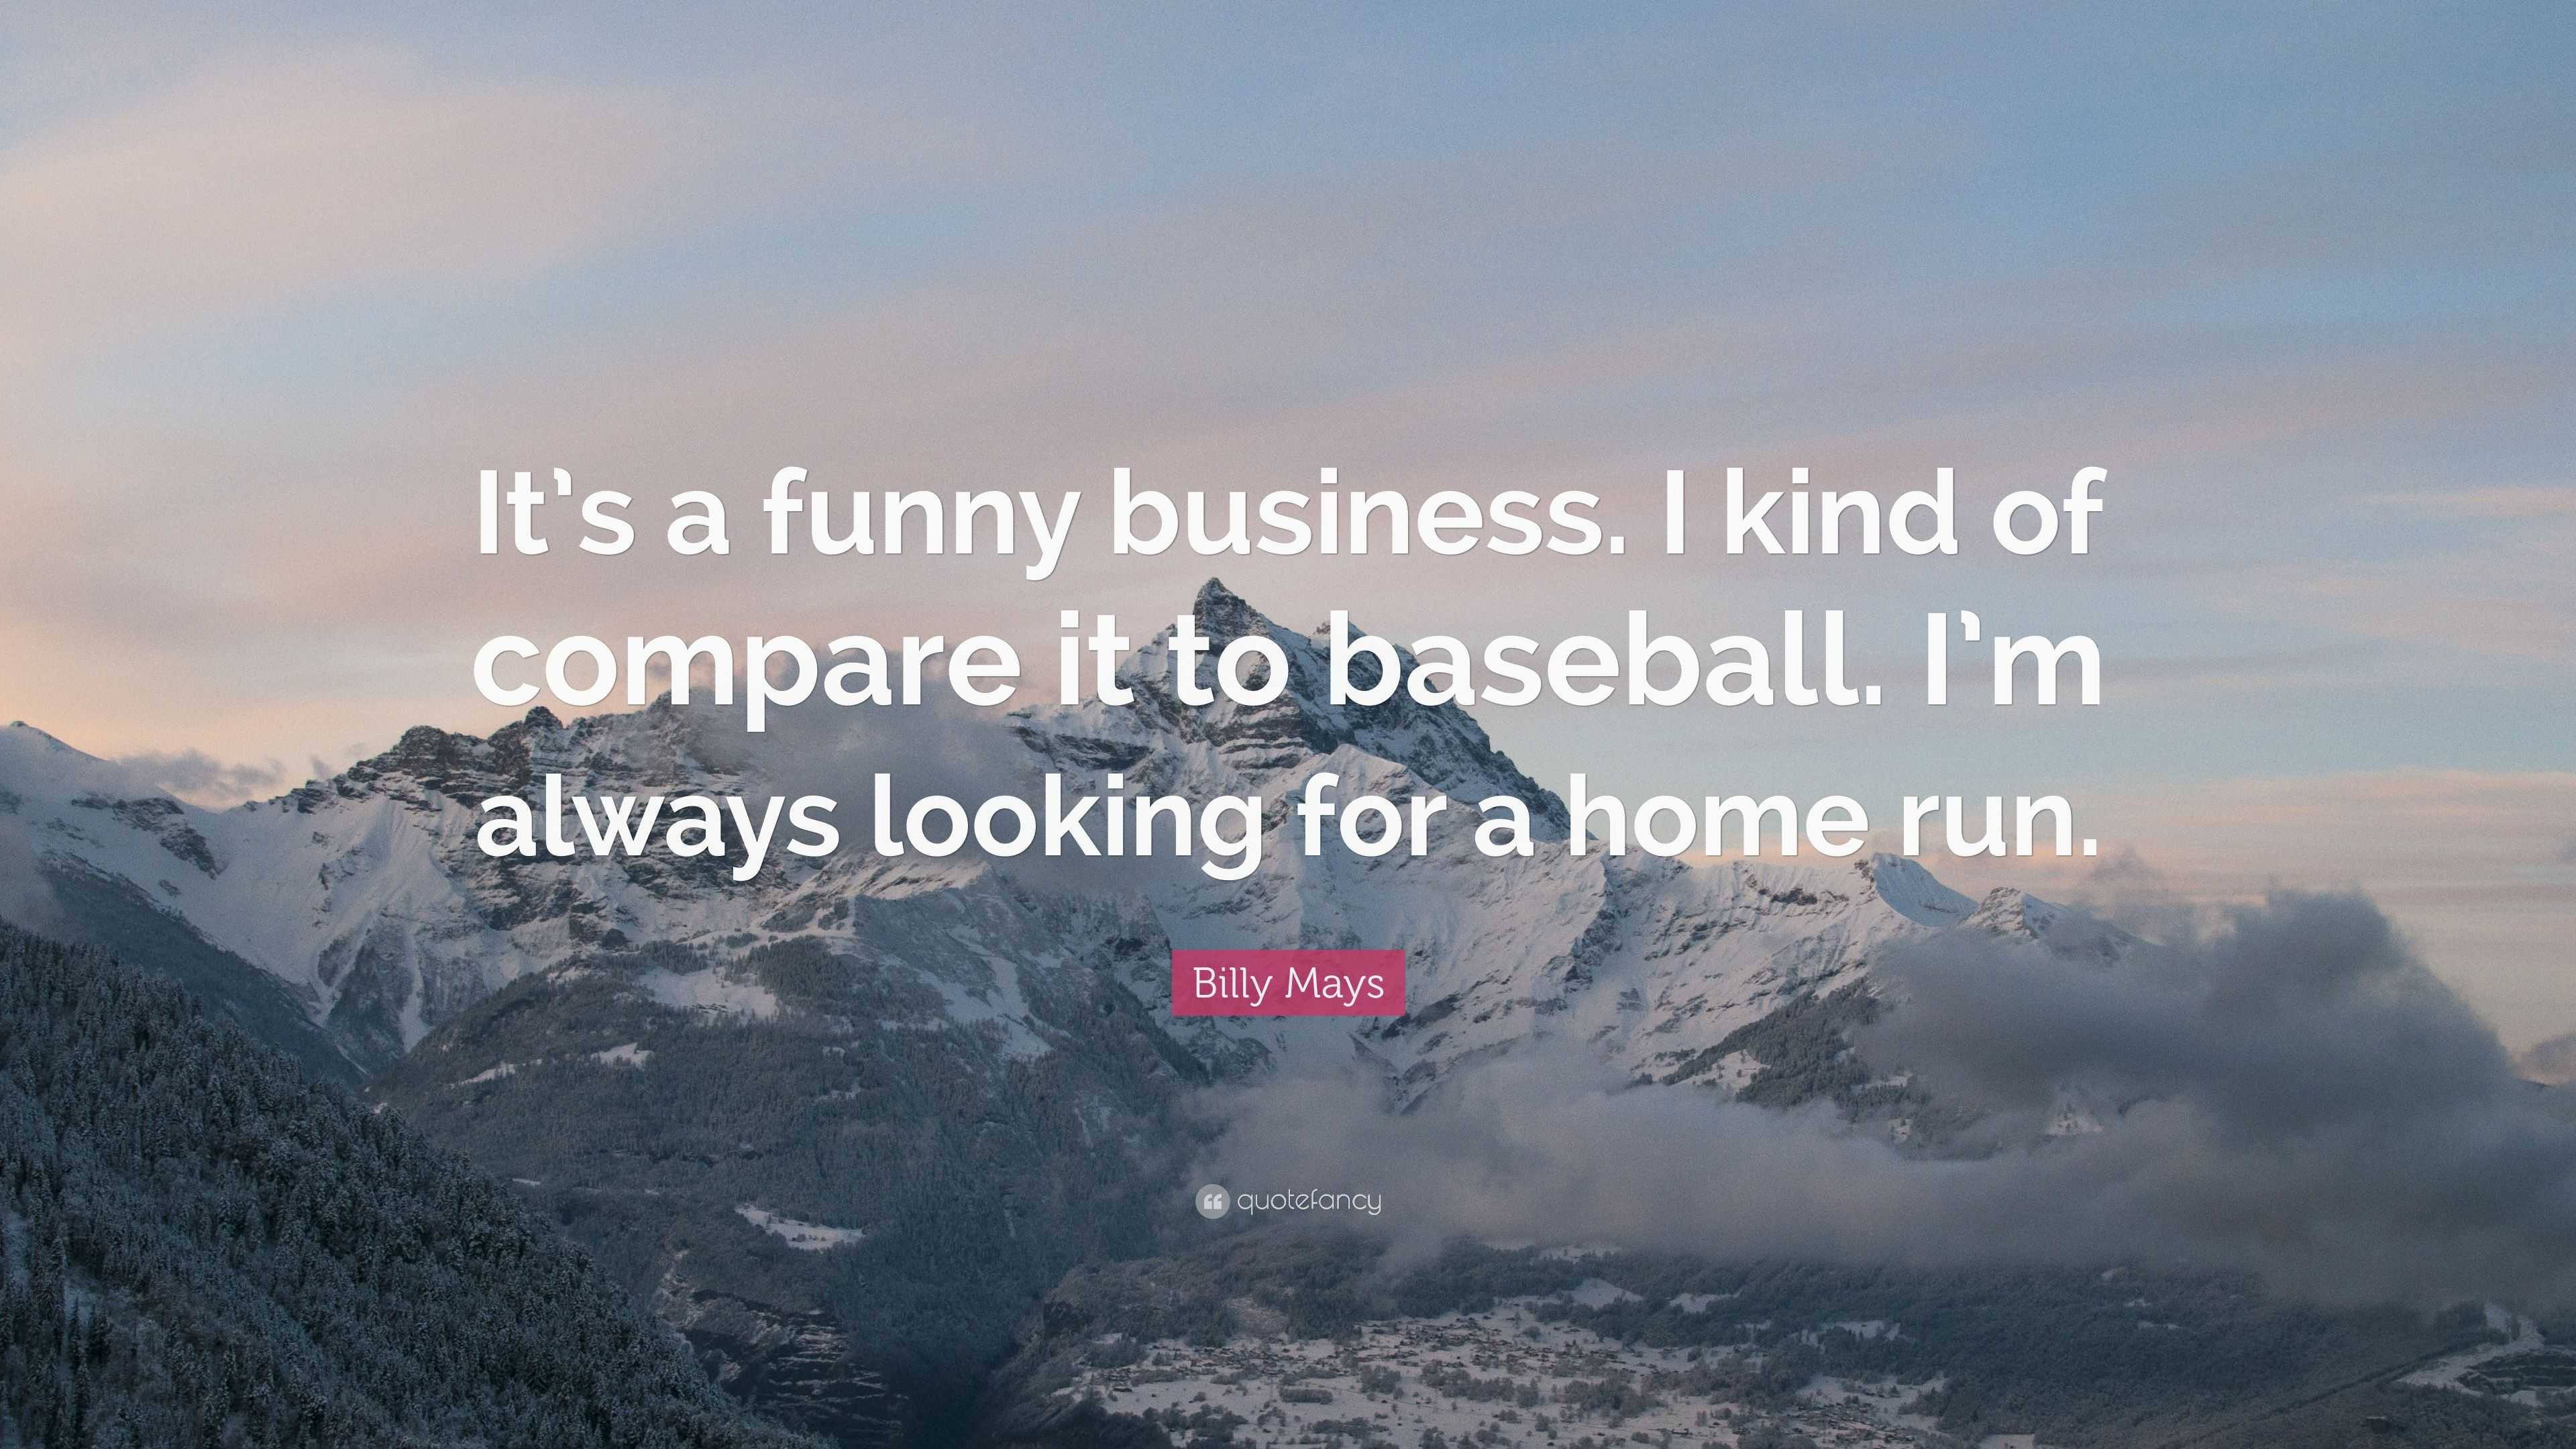 Billy Mays Quote: “It's a funny business. I kind of compare it to baseball.  I'm